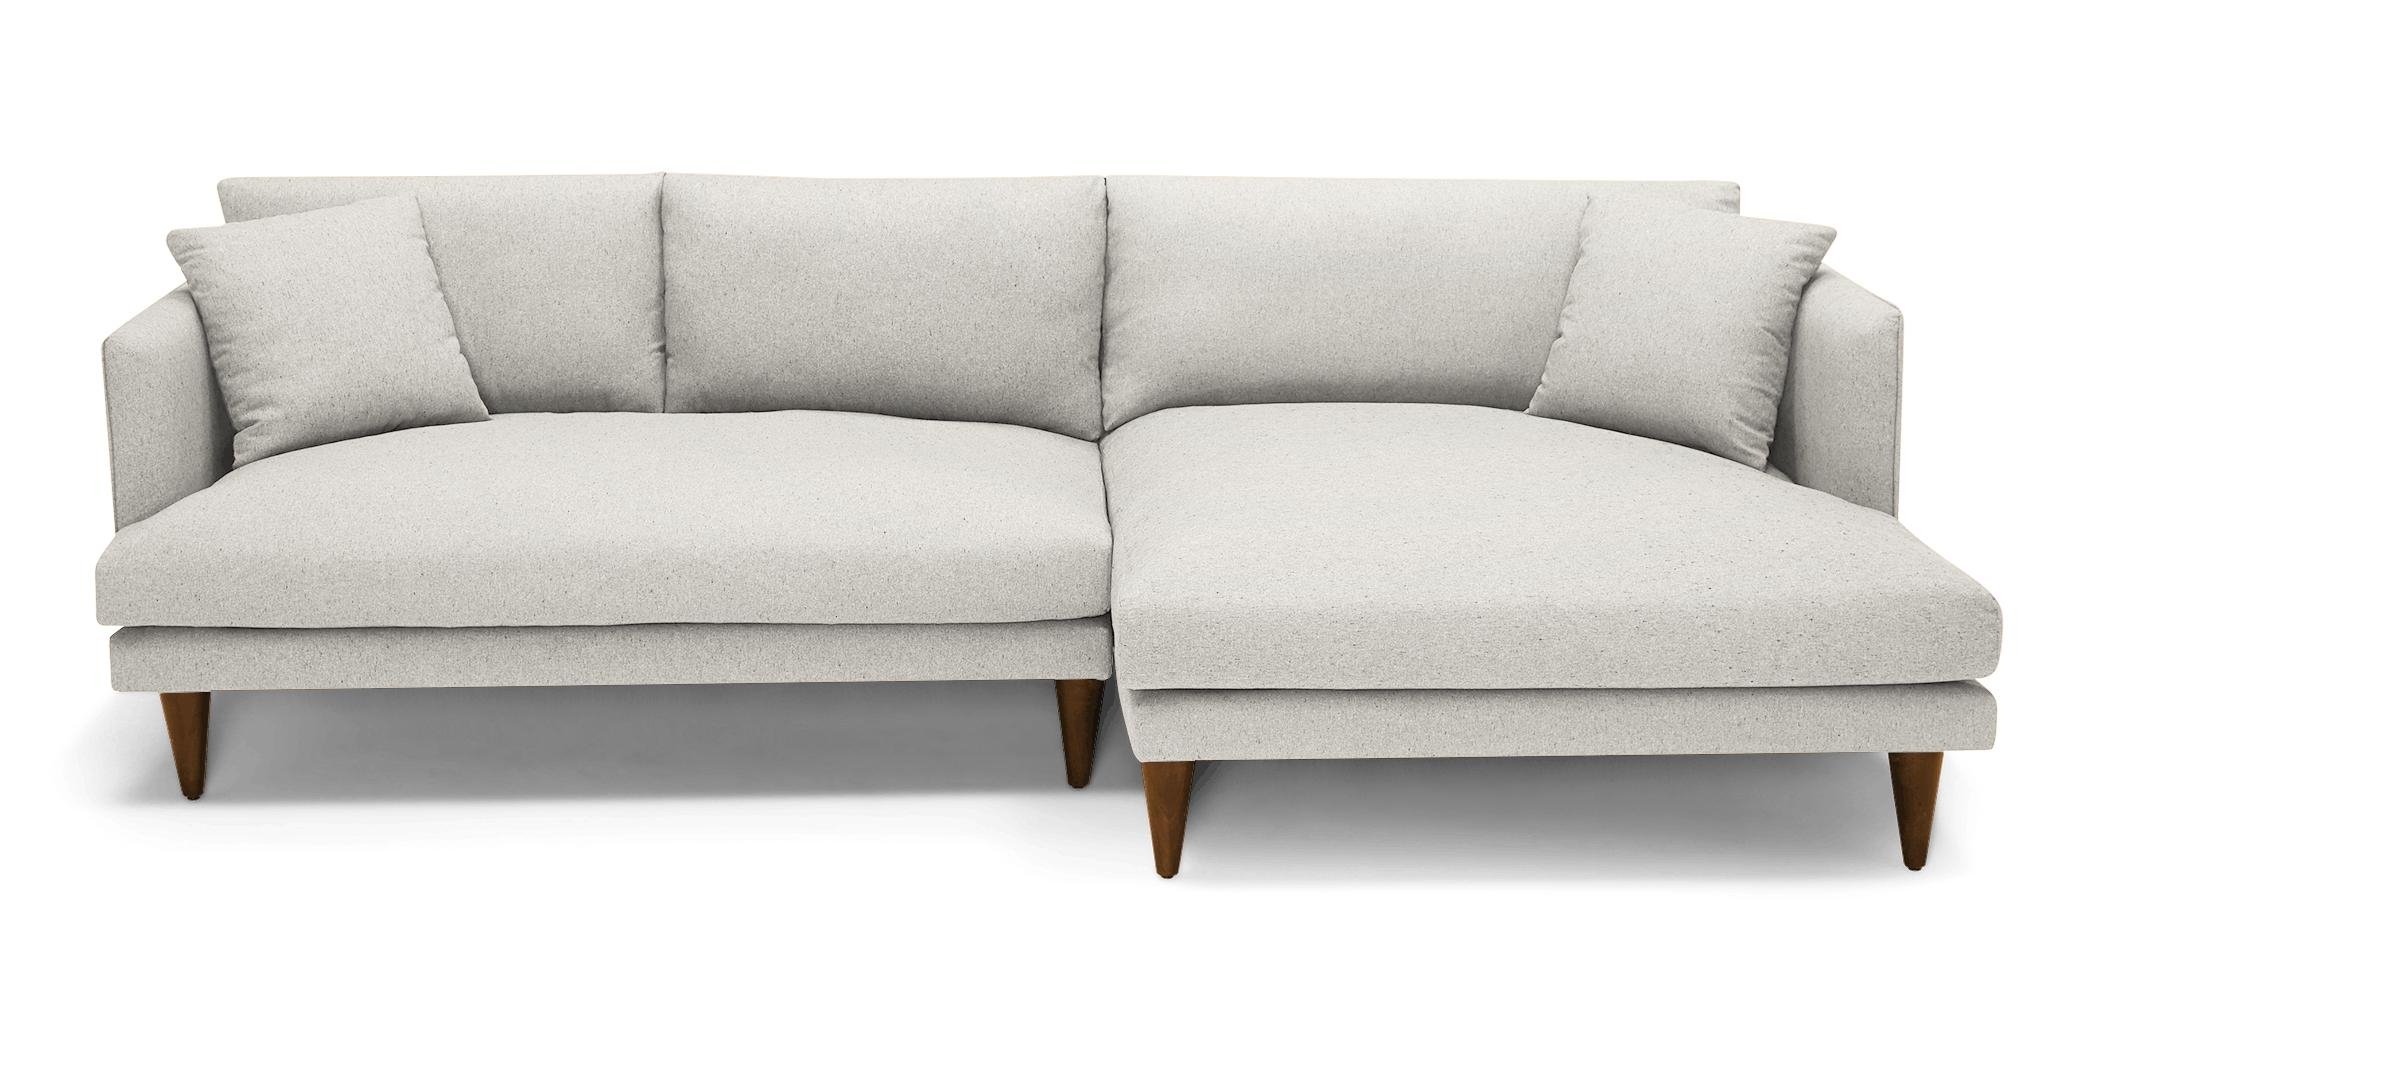 Gray Lewis Mid Century Modern Sectional - Bloke Cotton - Mocha - Right - Cone - Image 0